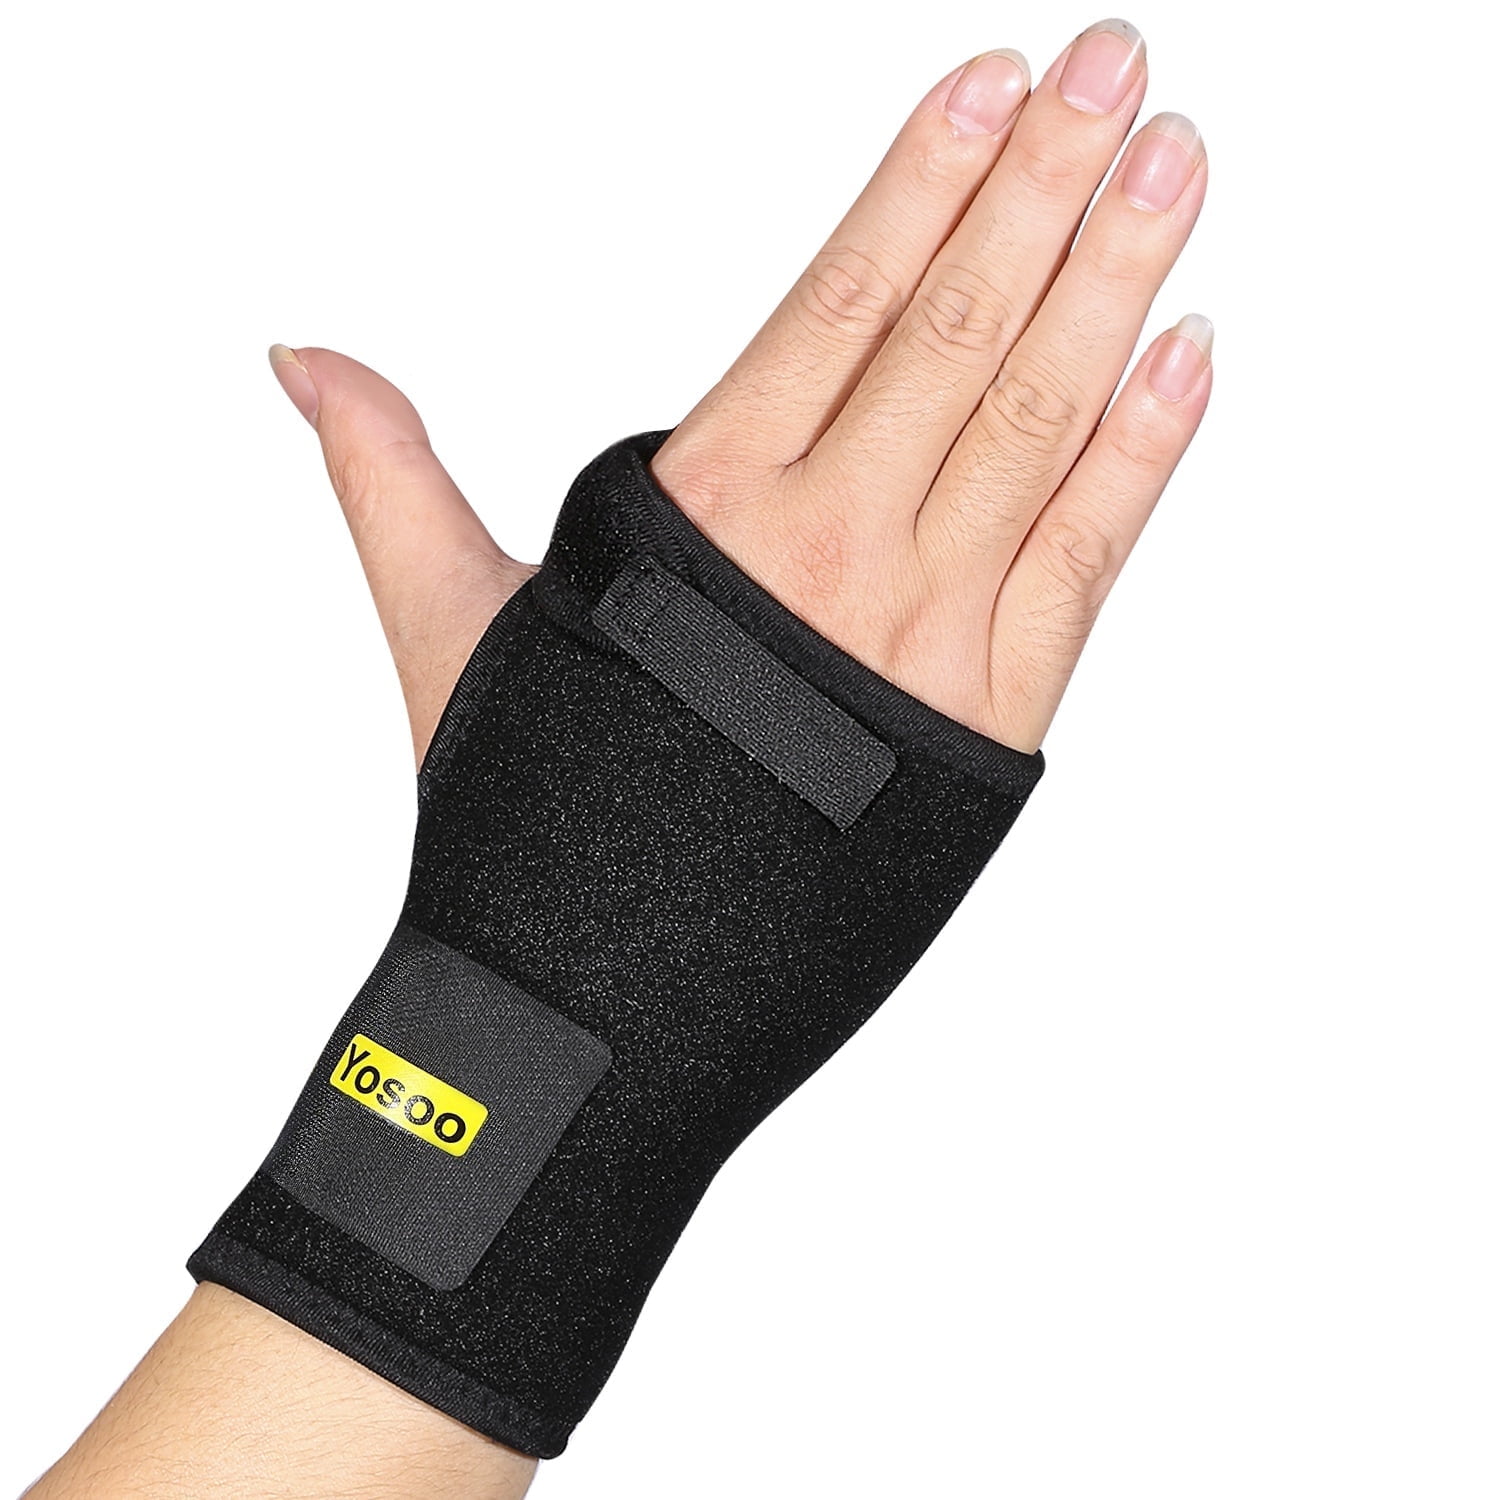 Carpal Tunnel Wrist Brace for Men and Women - Day and Night